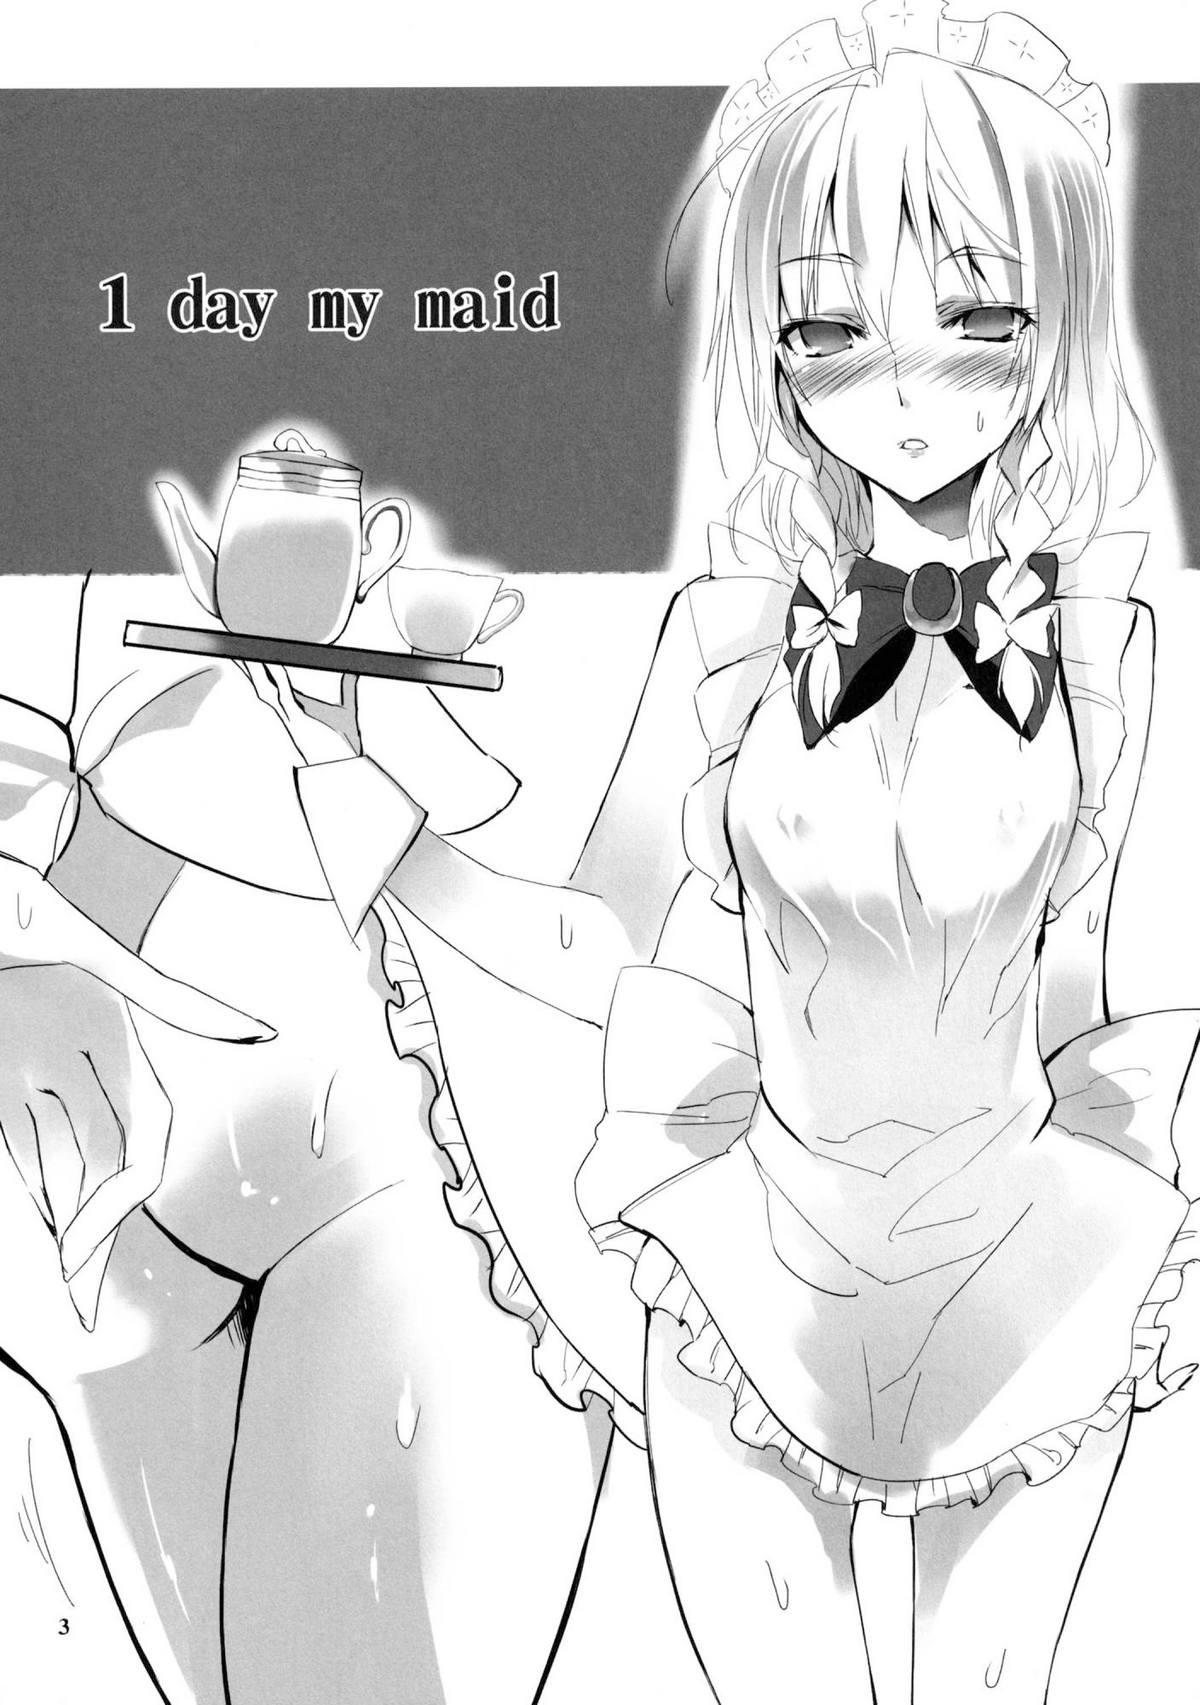 Stud 1 day my maid - Touhou project Amateur Porn - Page 3